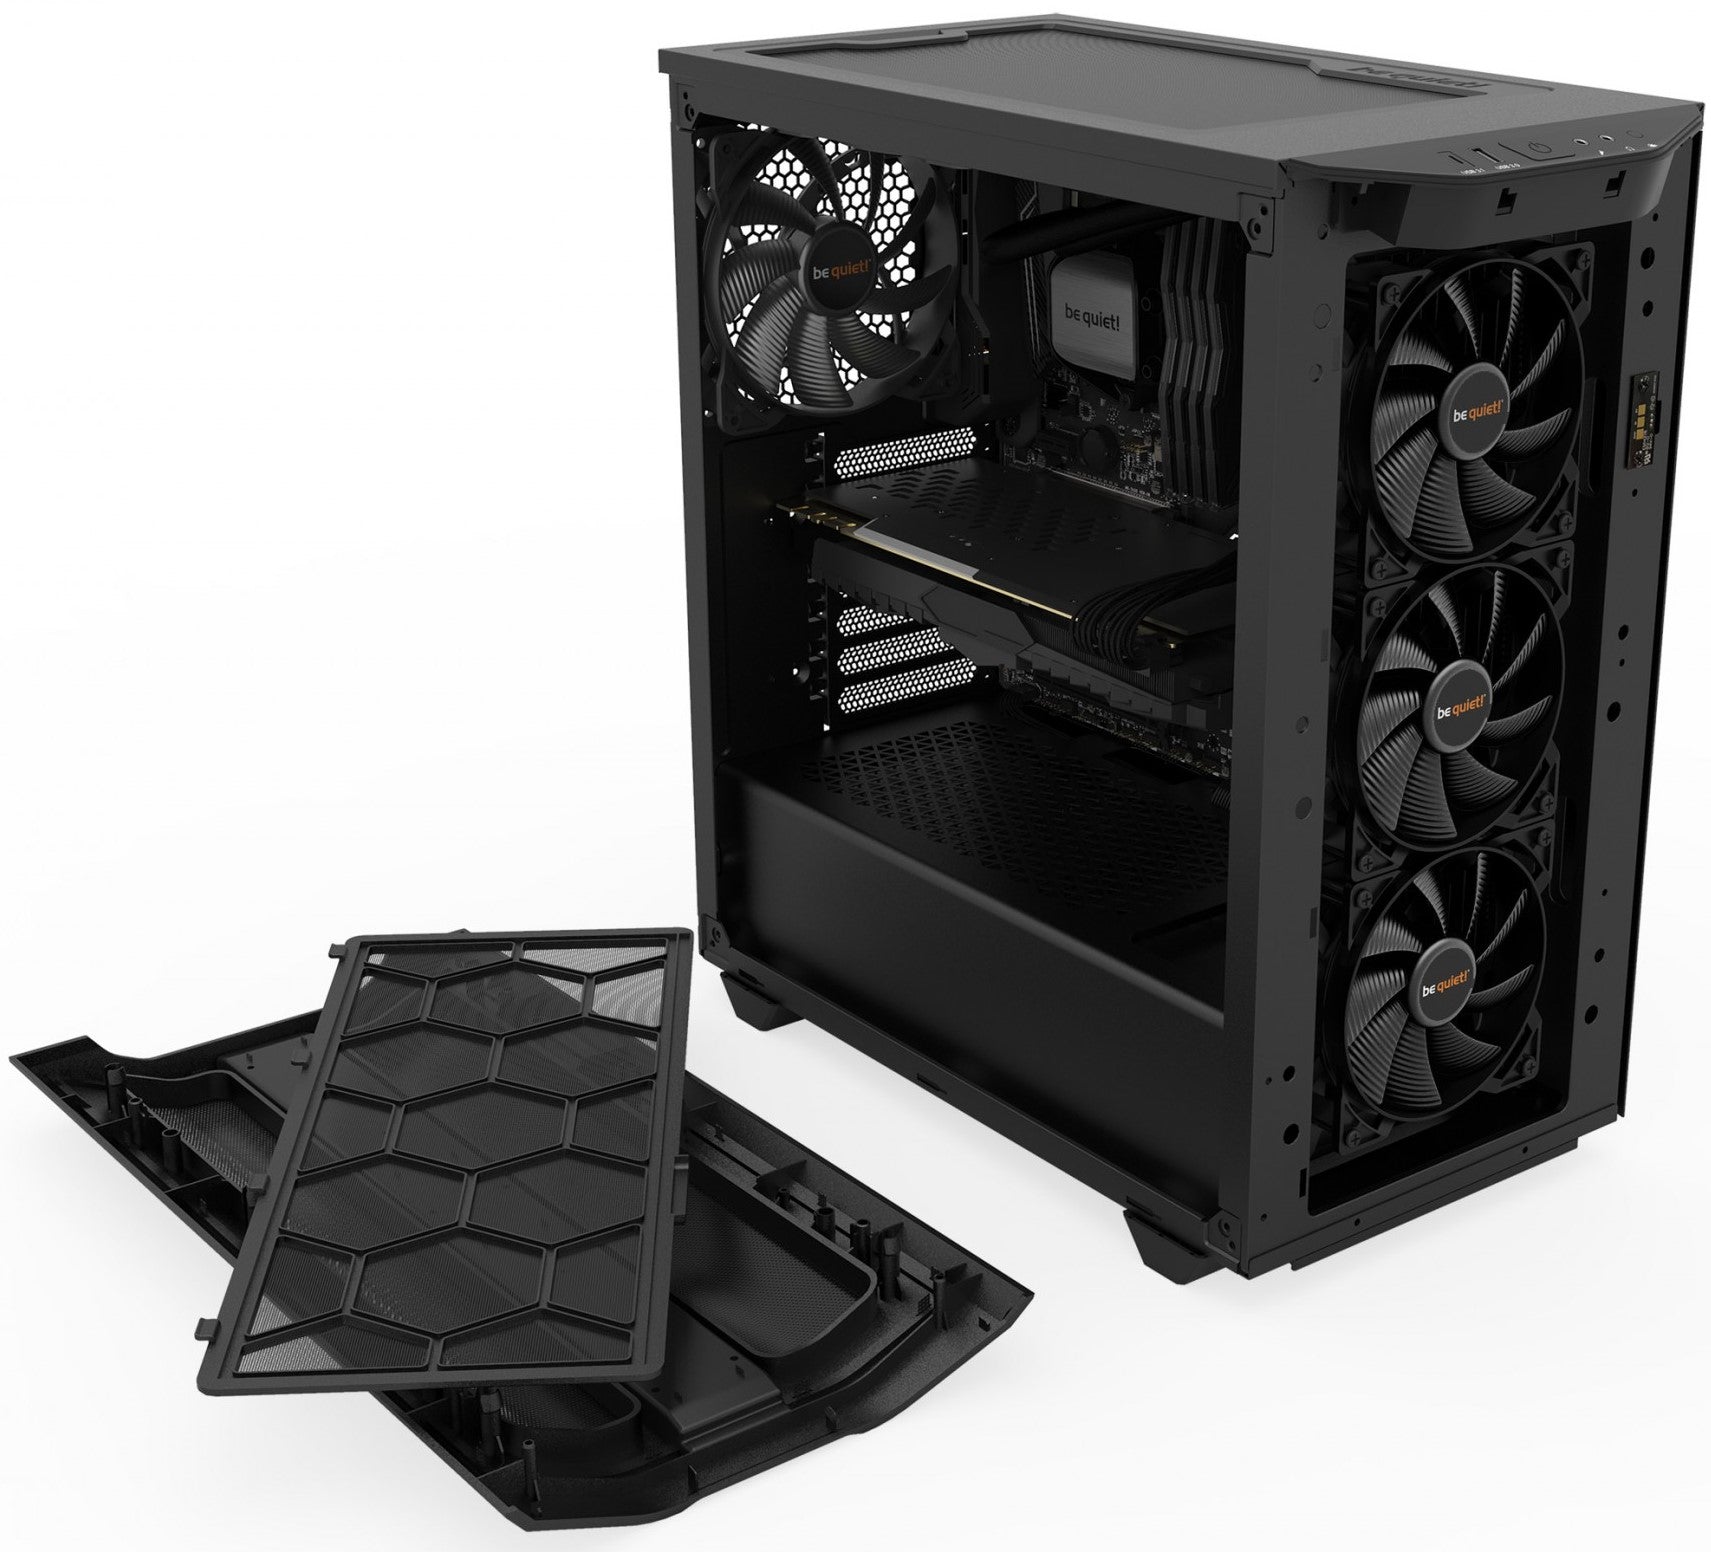 Case be quiet! PURE BASE 500DX Mid Tower Chassis - Albagame